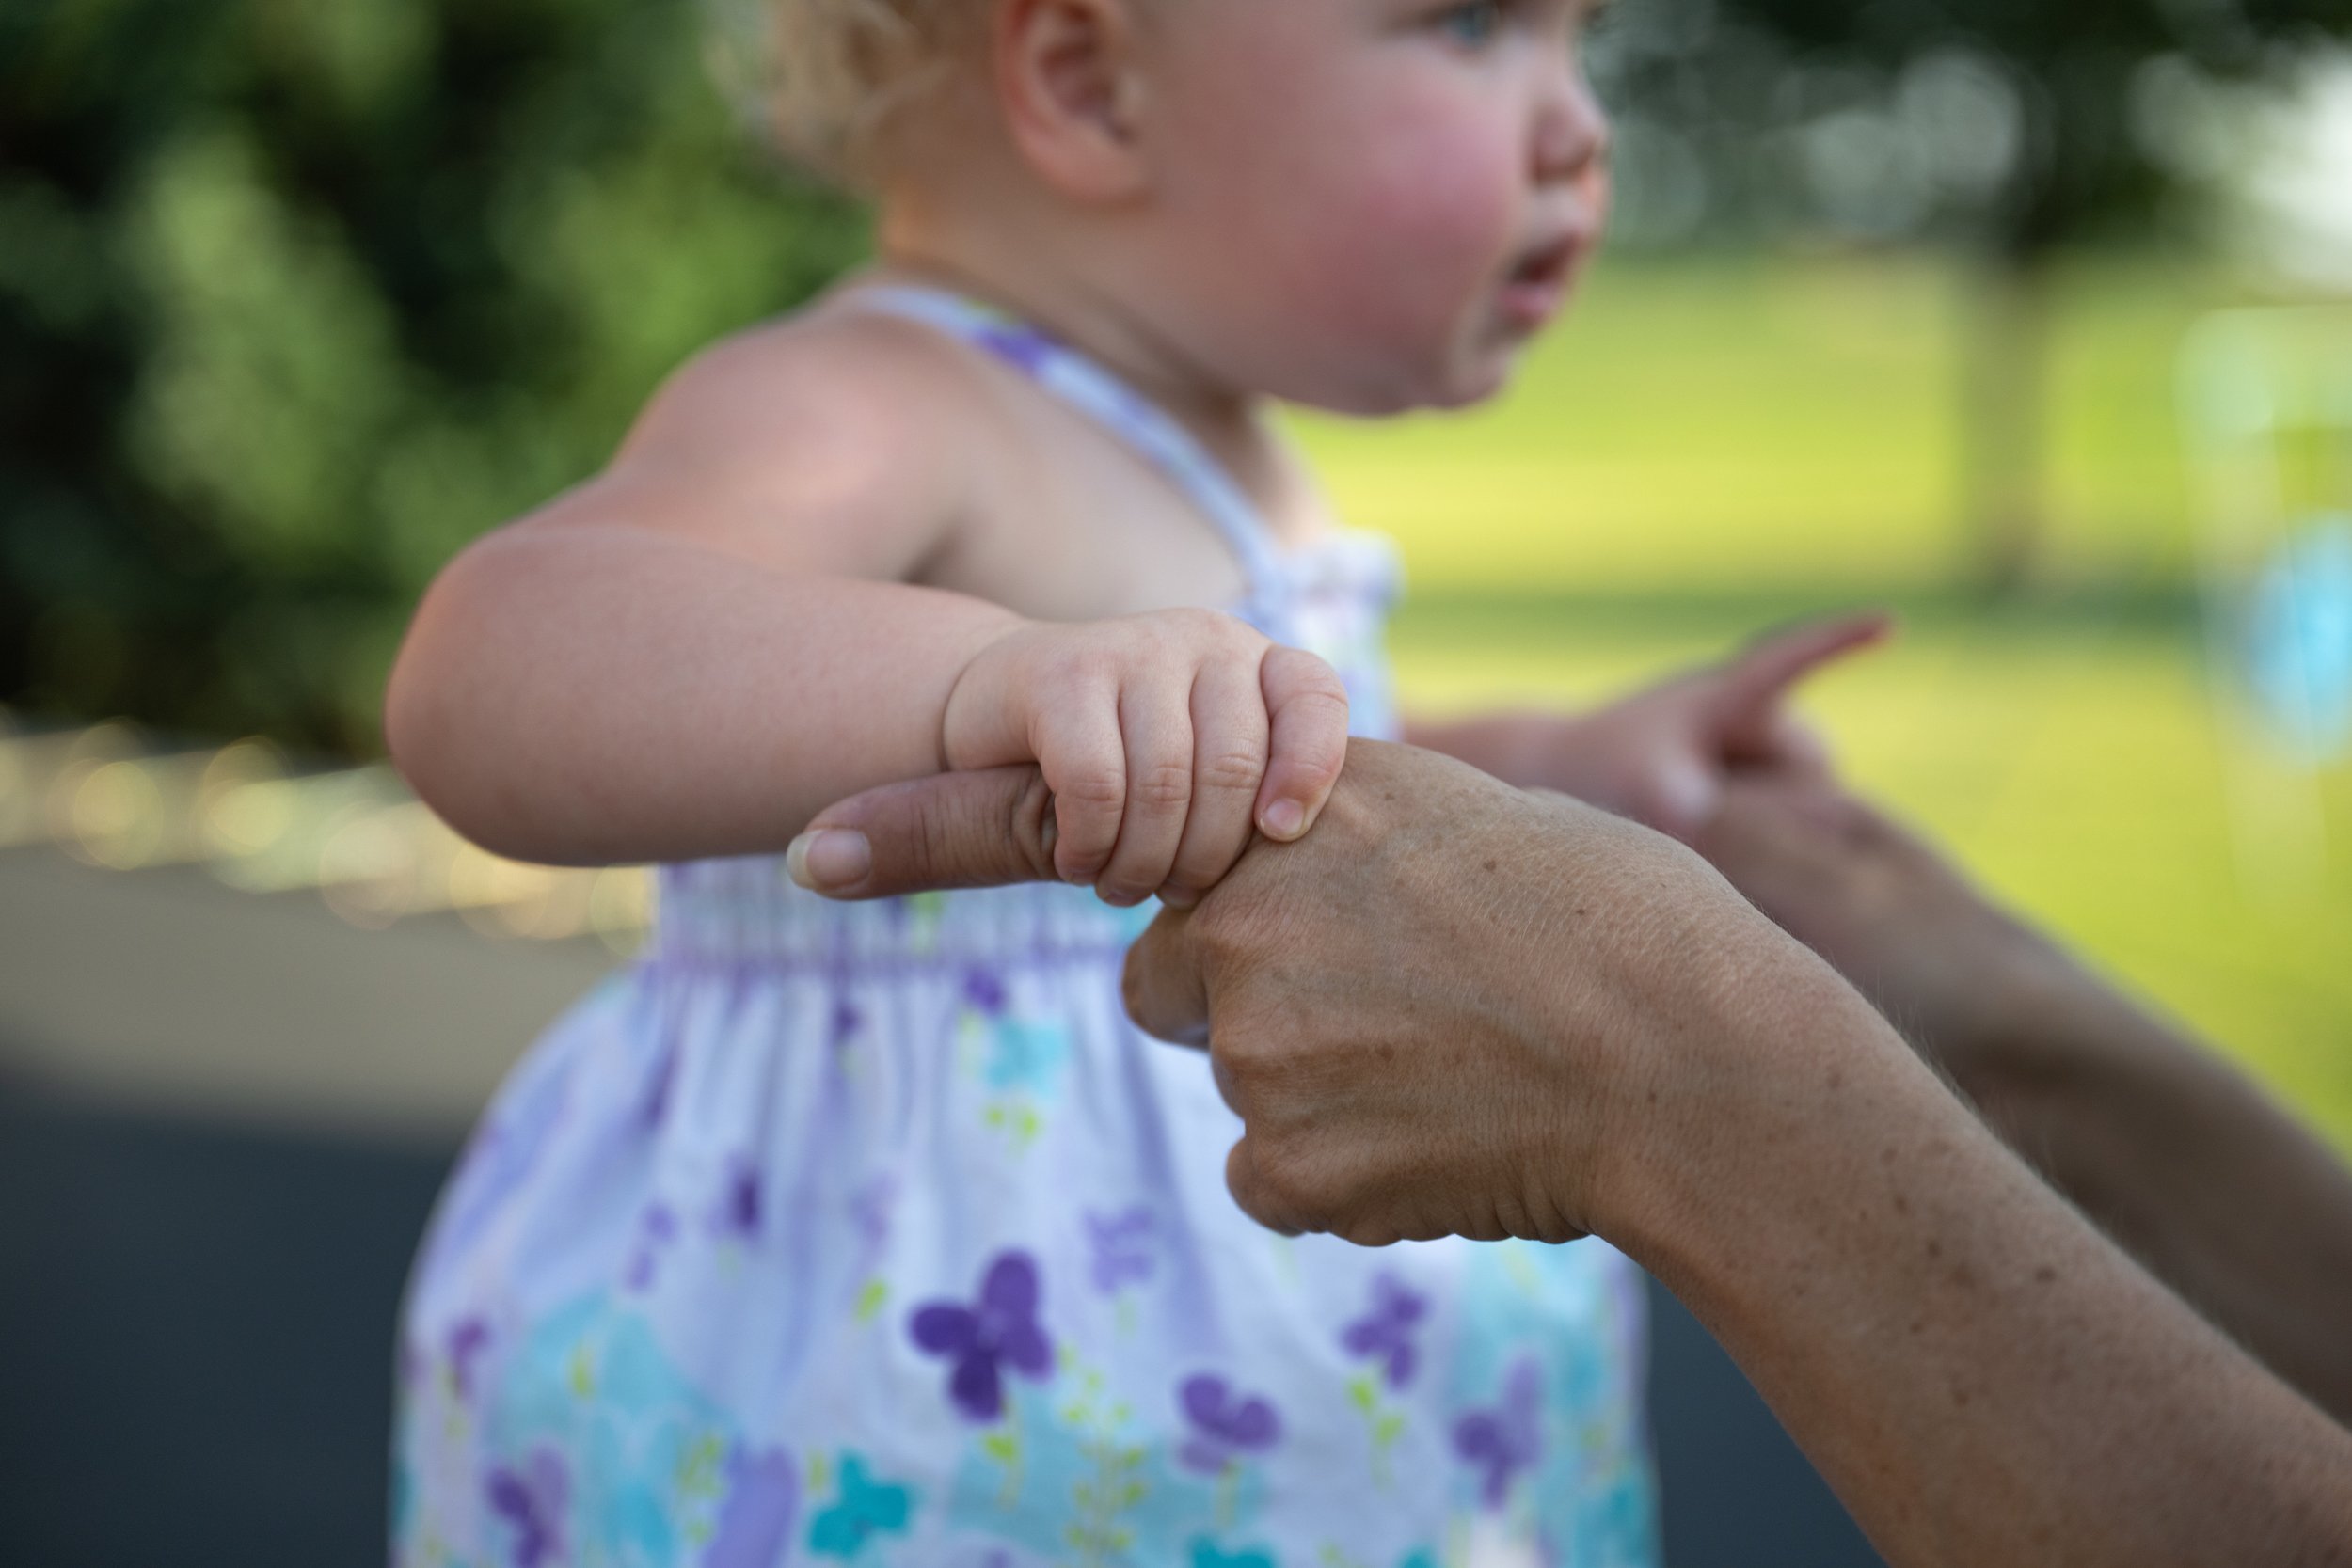  7/7/23 -- Cynthiana, Kentucky —  Emberly Sumpter, left, 1, holds her grandmother  Nicole McNees's hand for support as Sumpter jumps on the trampoline at McNees' home in Cynthiana, KY on July 7, 2023. 